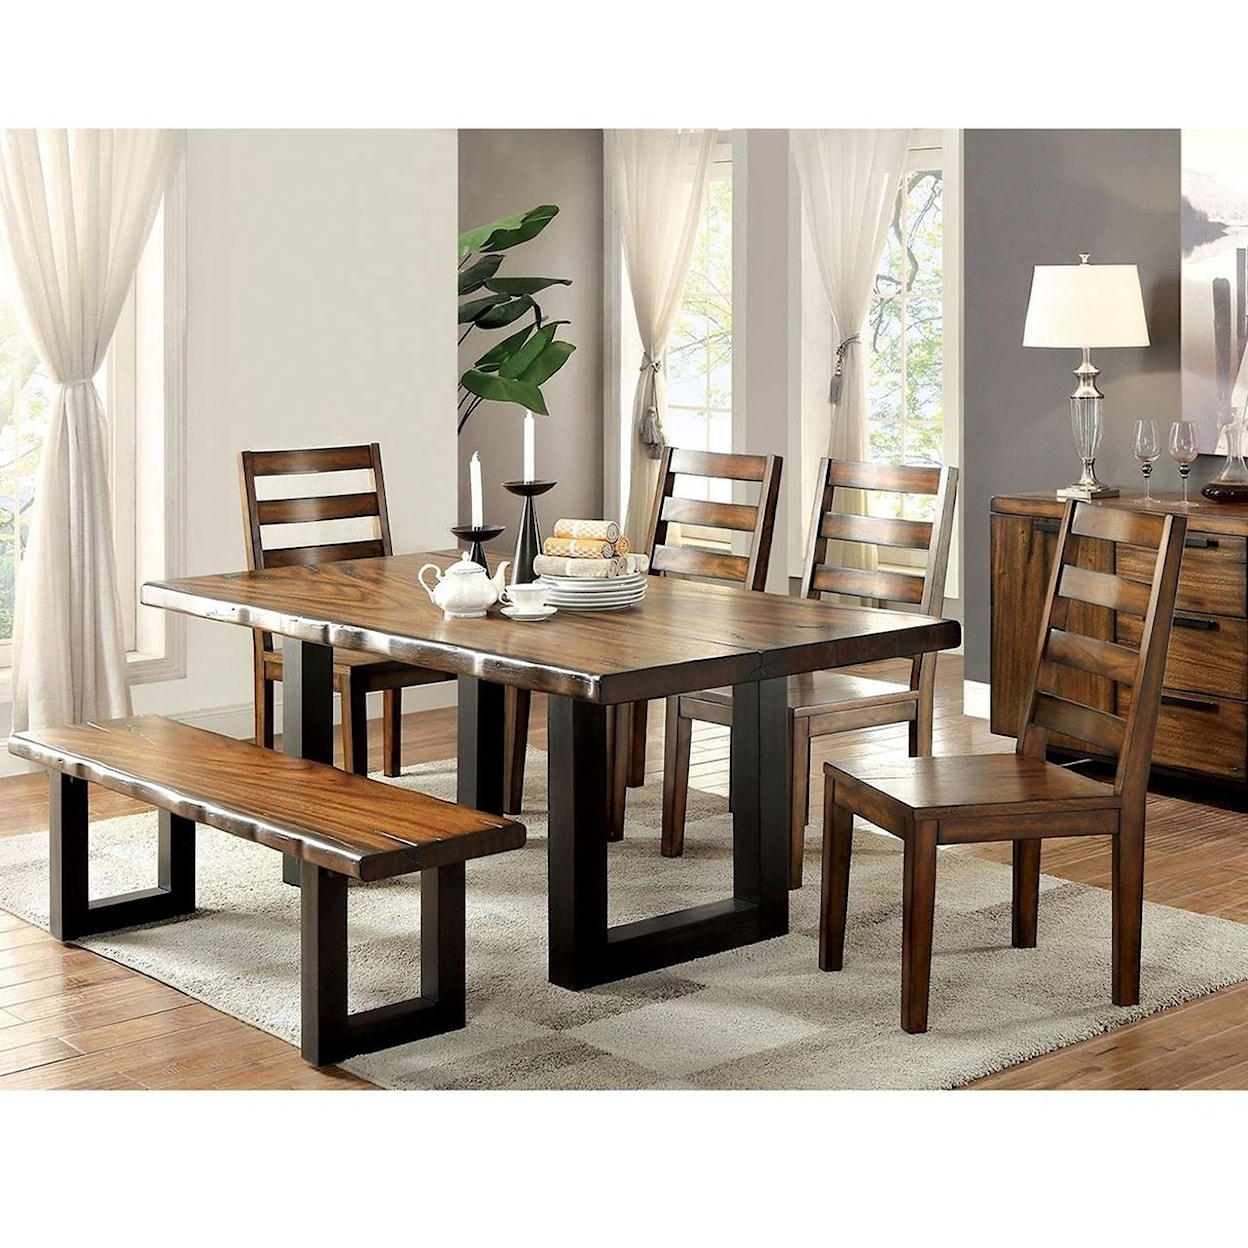 Furniture of America Maddison Dining Set with Bench